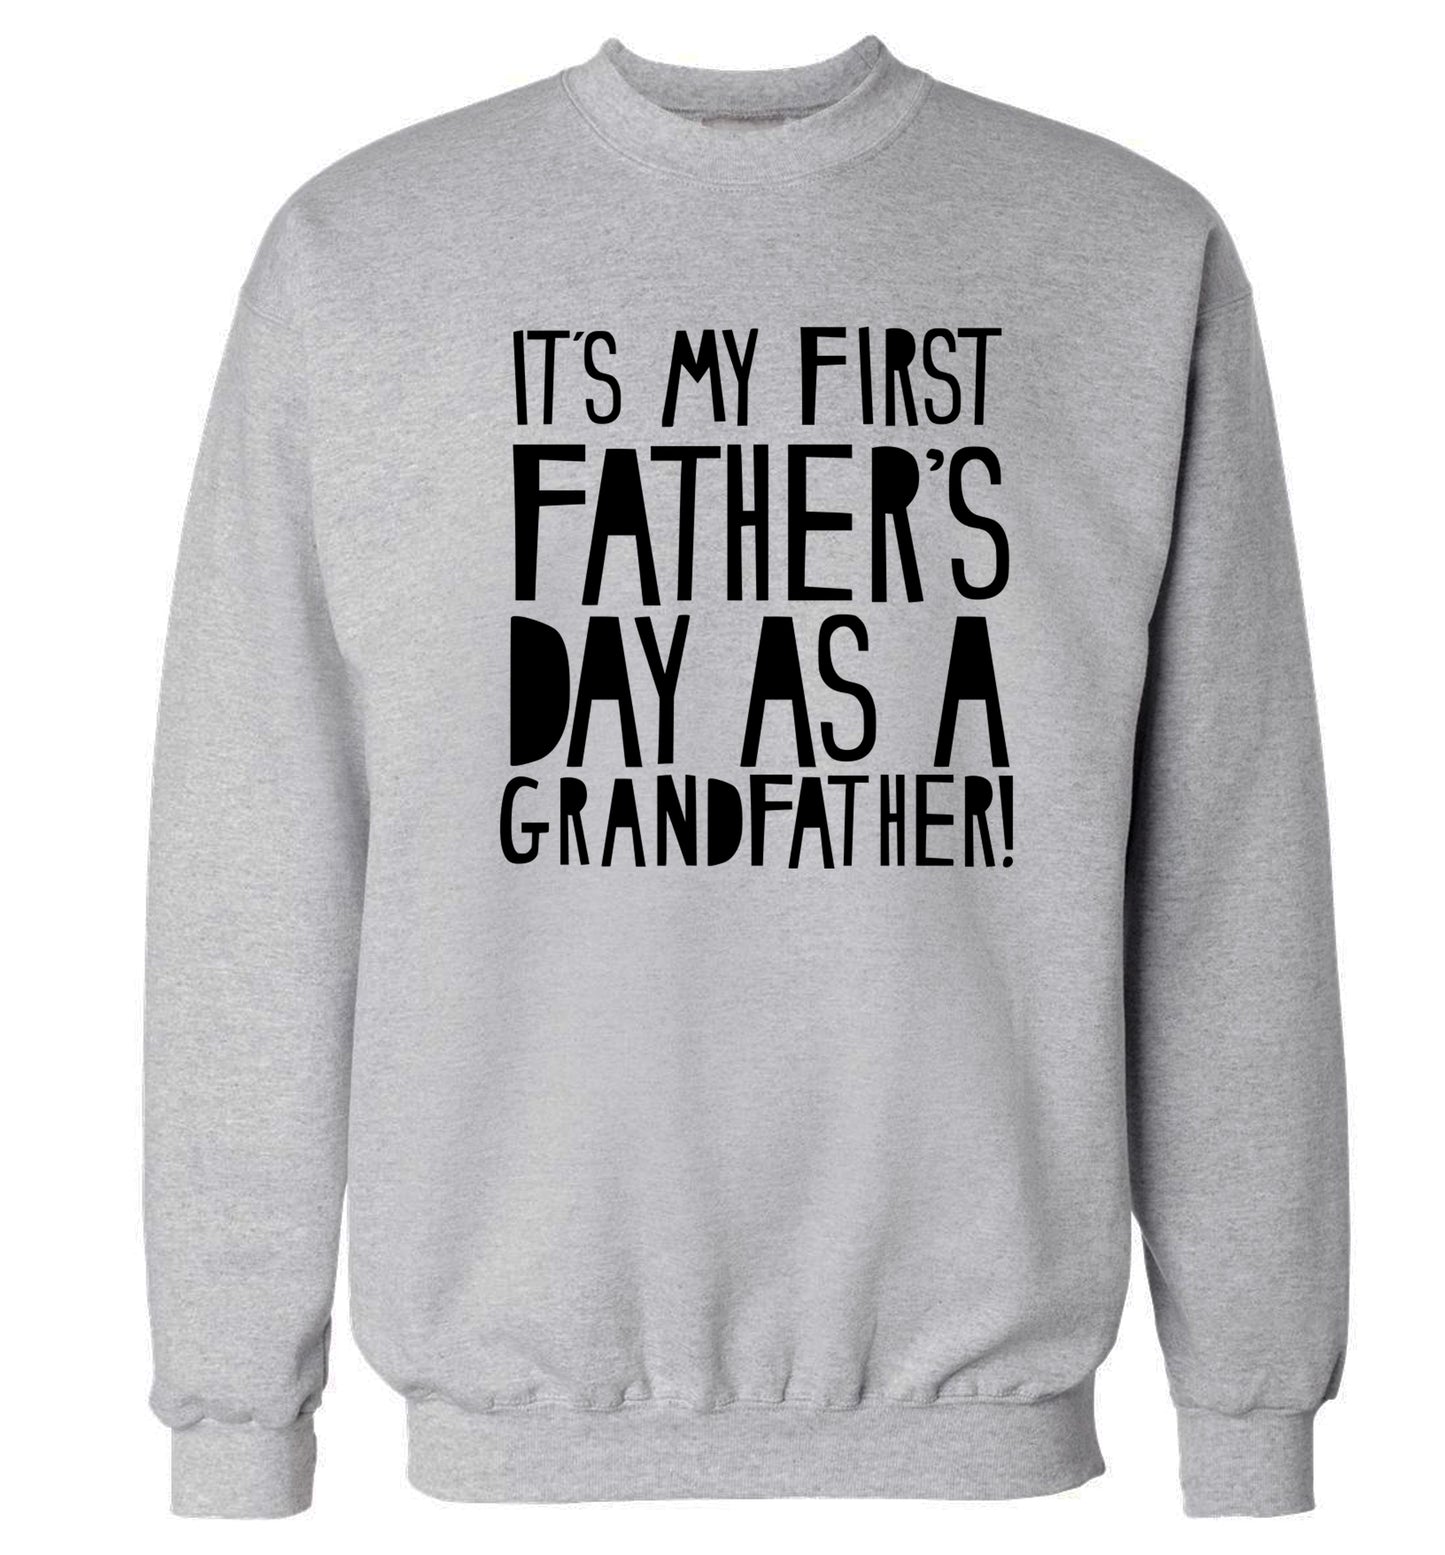 It's my first Father's Day as a Grandfather! Adult's unisex grey Sweater 2XL